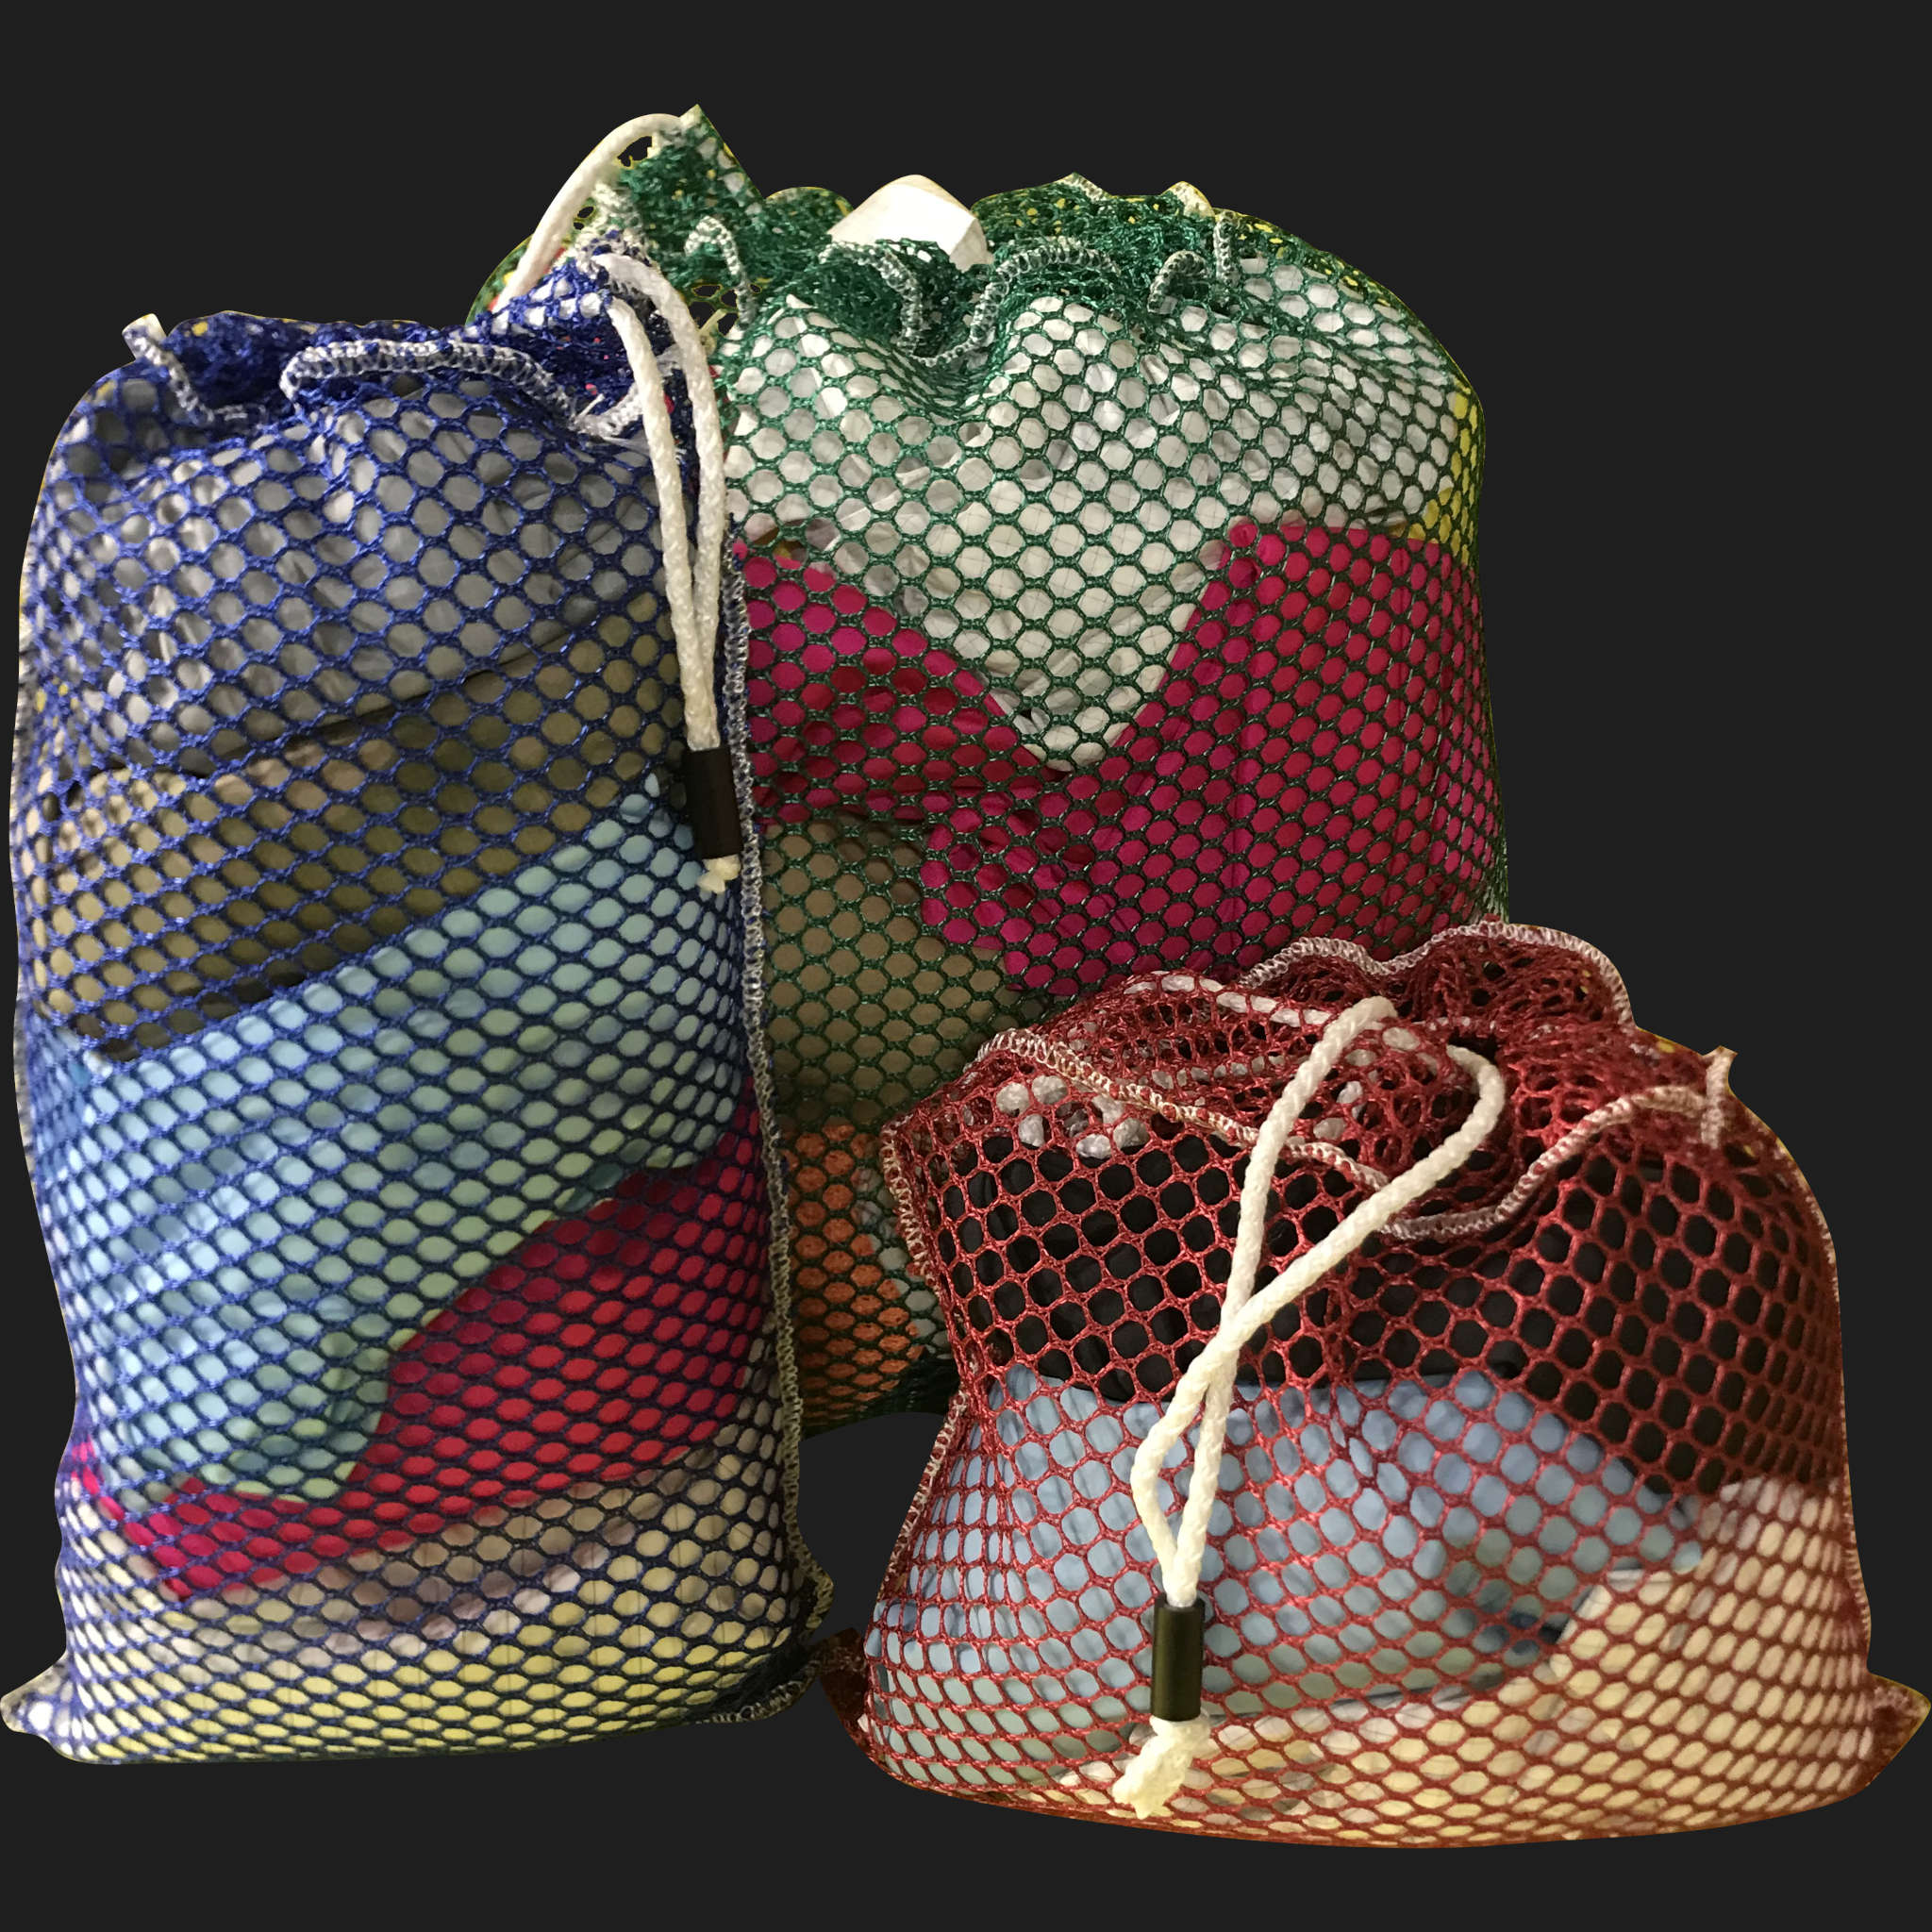 20" x 40" Customized Mesh-Net-Laundry Bags Heavy Duty with Cord and barrellock closure